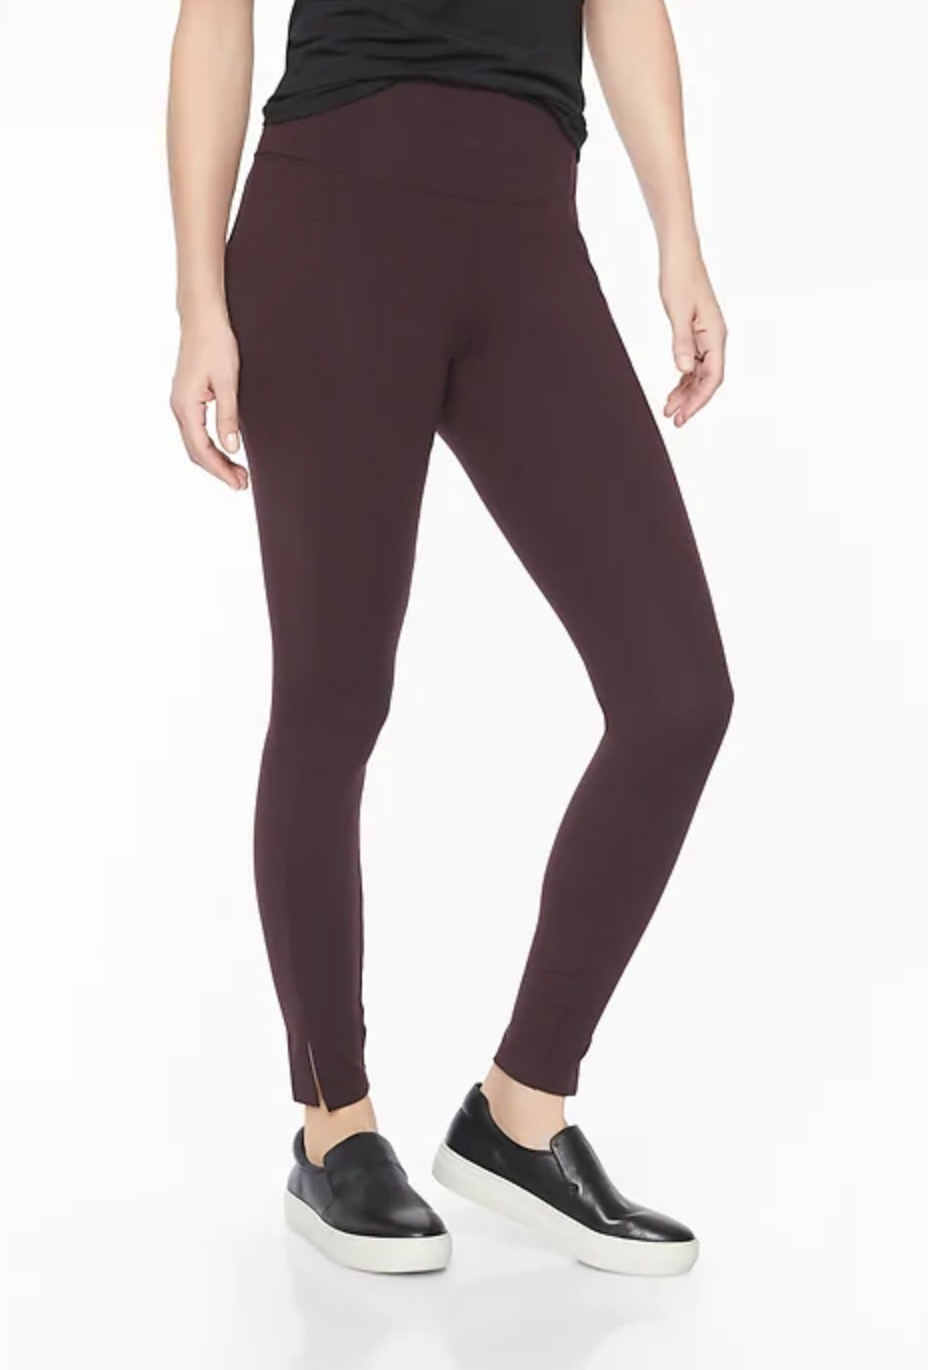 The Best of Athleta's Current Markdowns - AthletiKaty